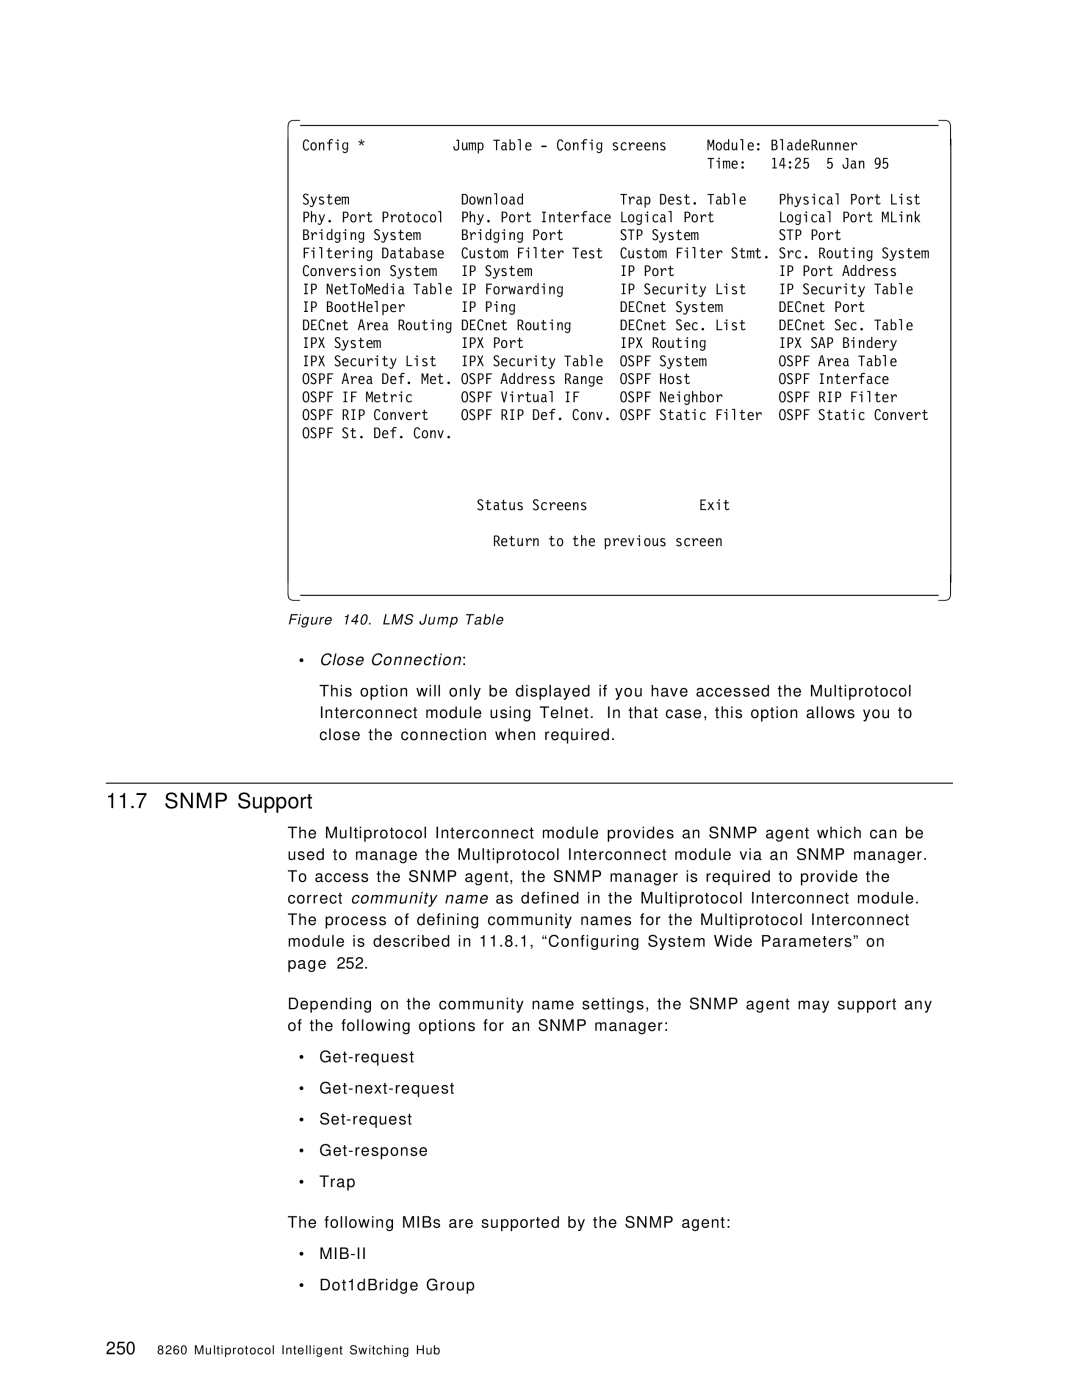 IBM 8260 manual Snmp Support, ∙ Close Connection, Dot1dBridge Group 